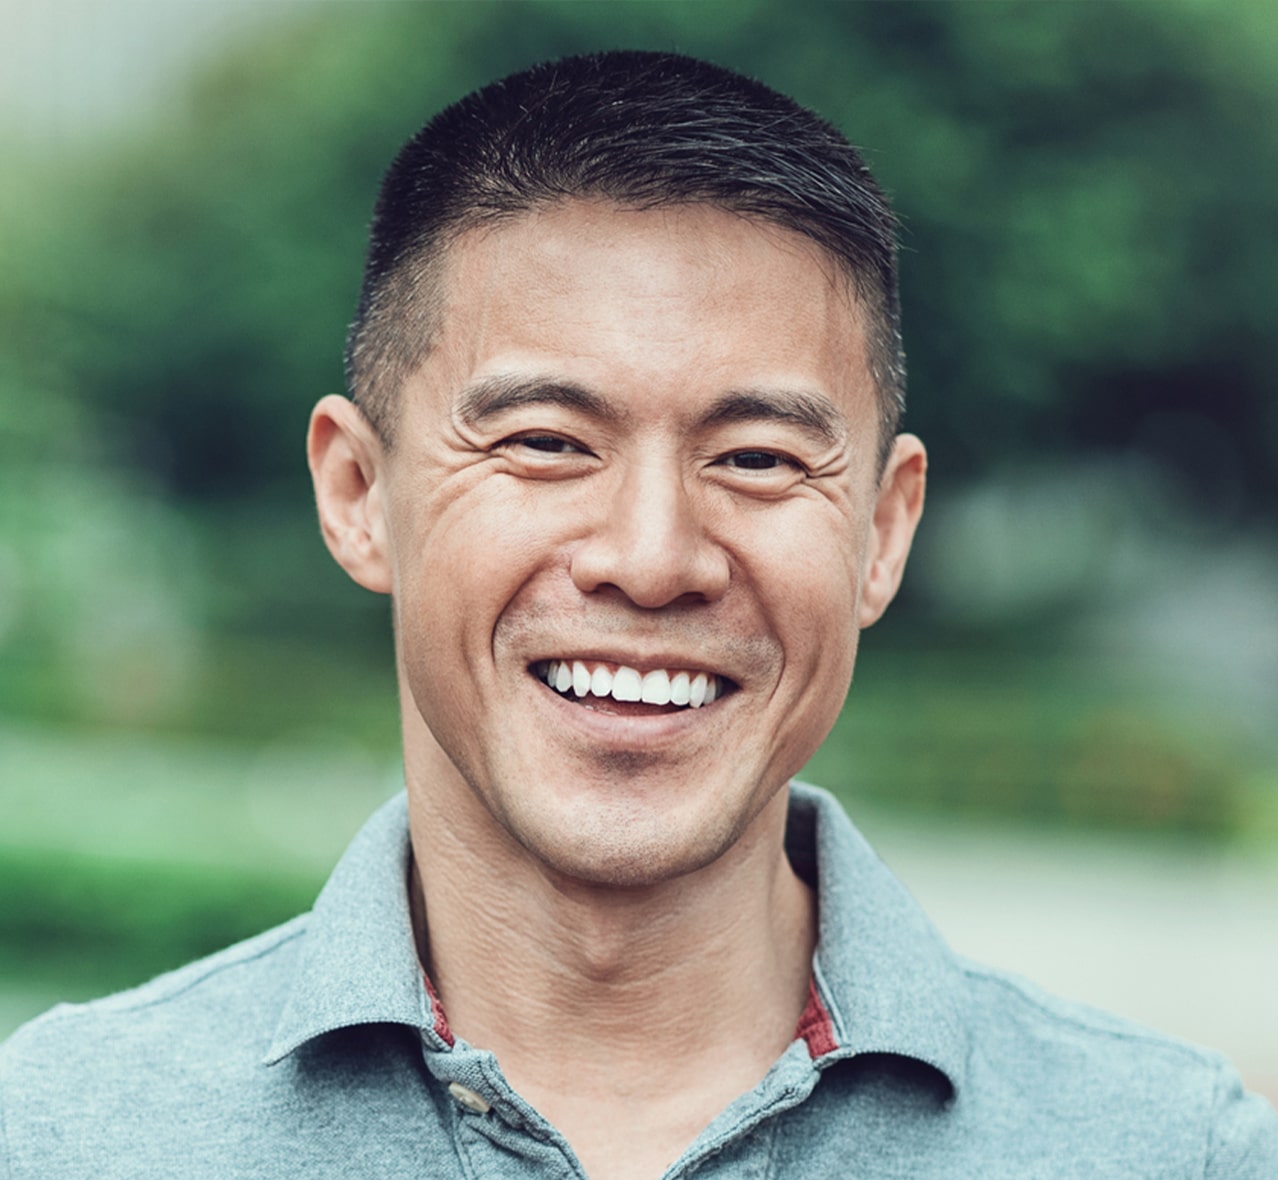 a close up of a man smiling with healthy teeth